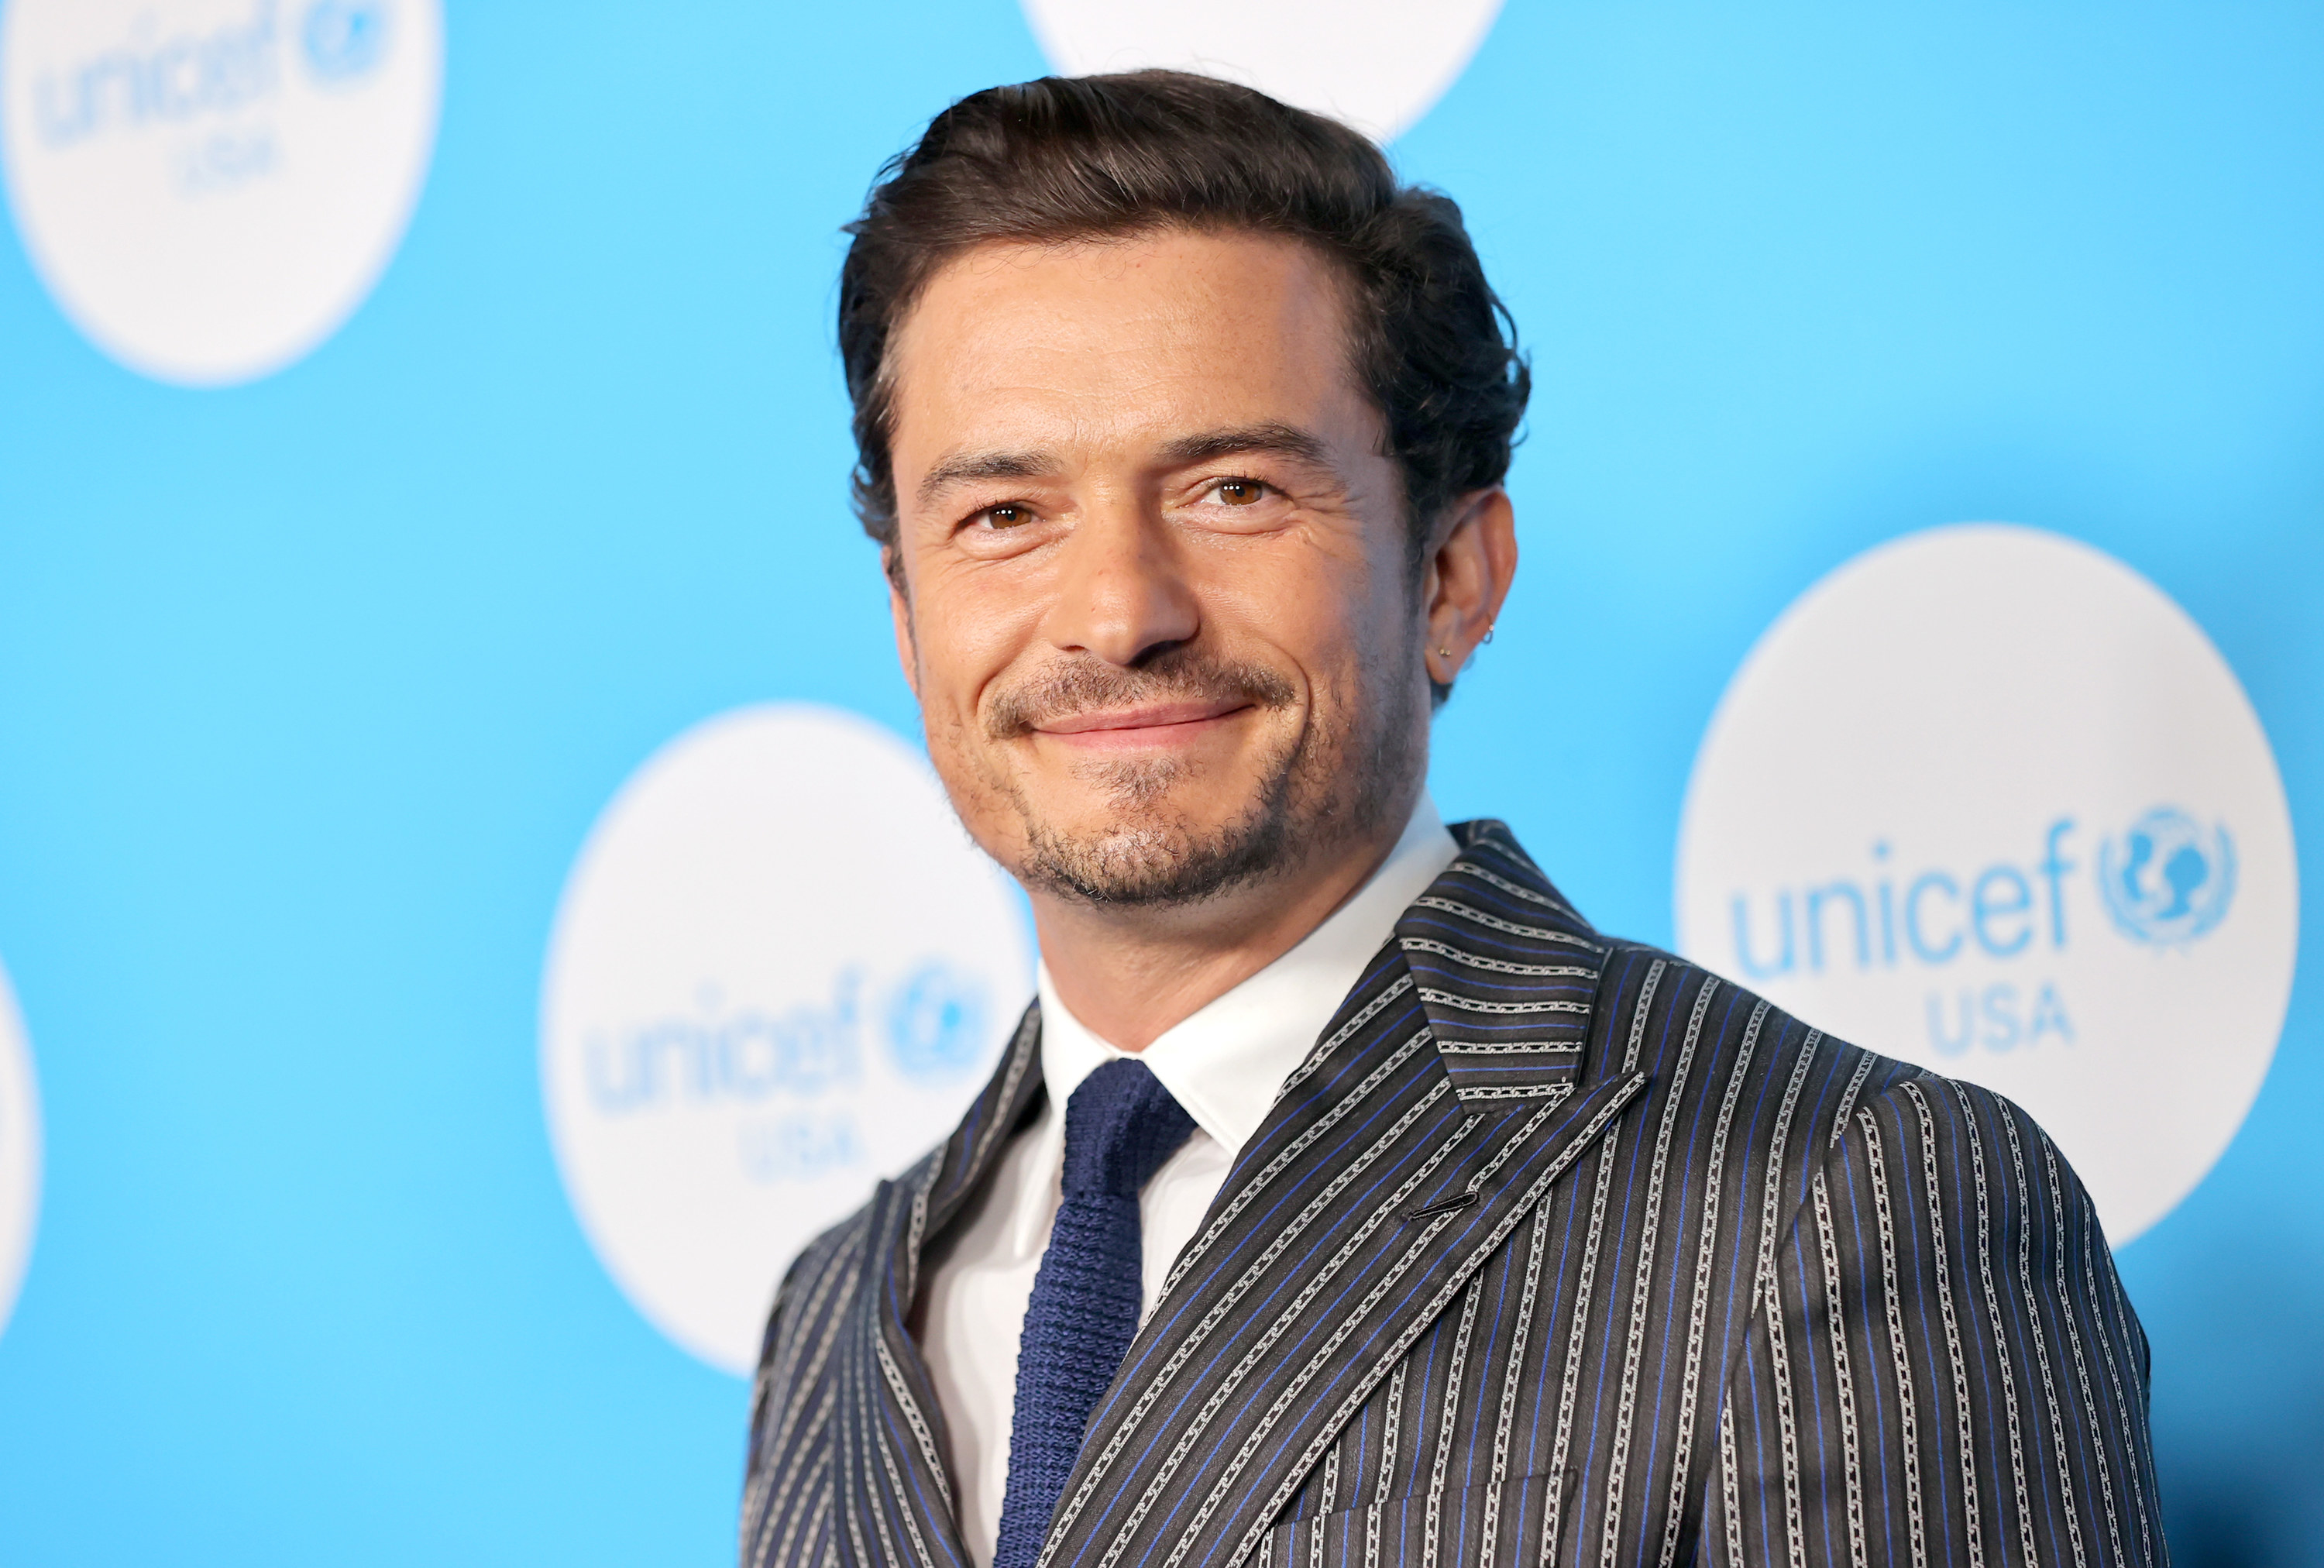 Orlando Bloom at an event